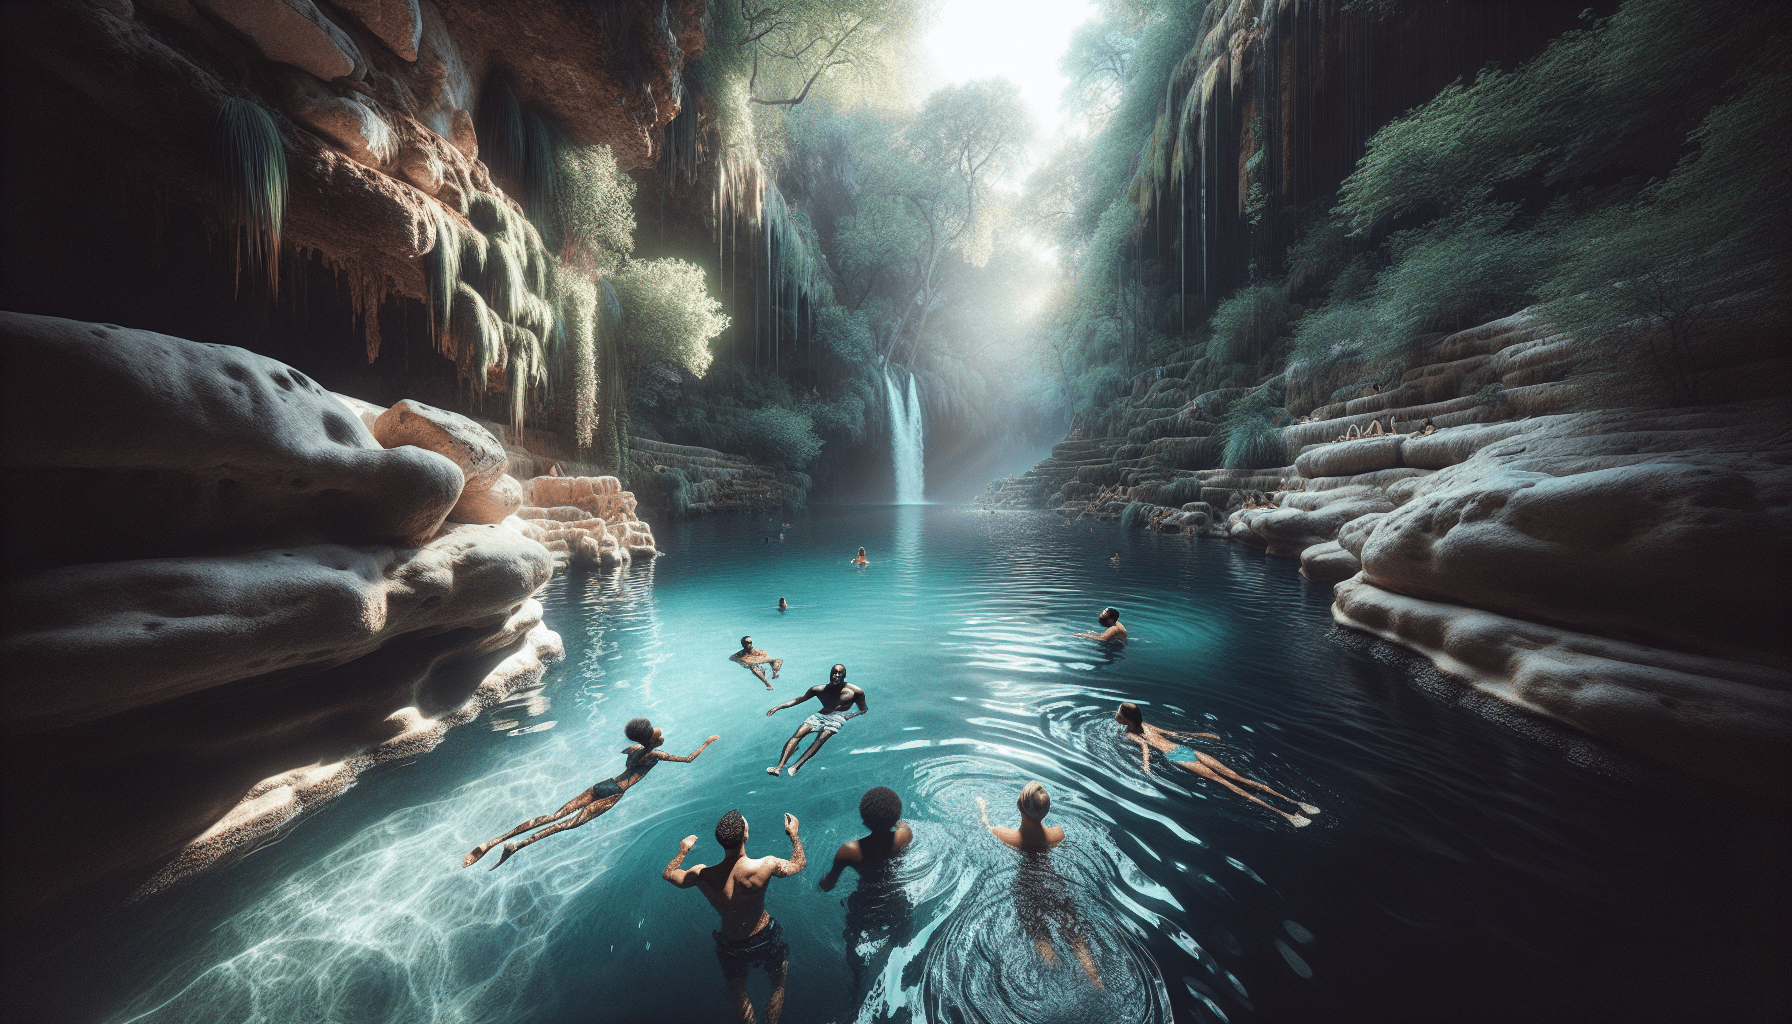 What Are The Hidden Natural Pools Or Swimming Holes Perfect For A Refreshing Dip?